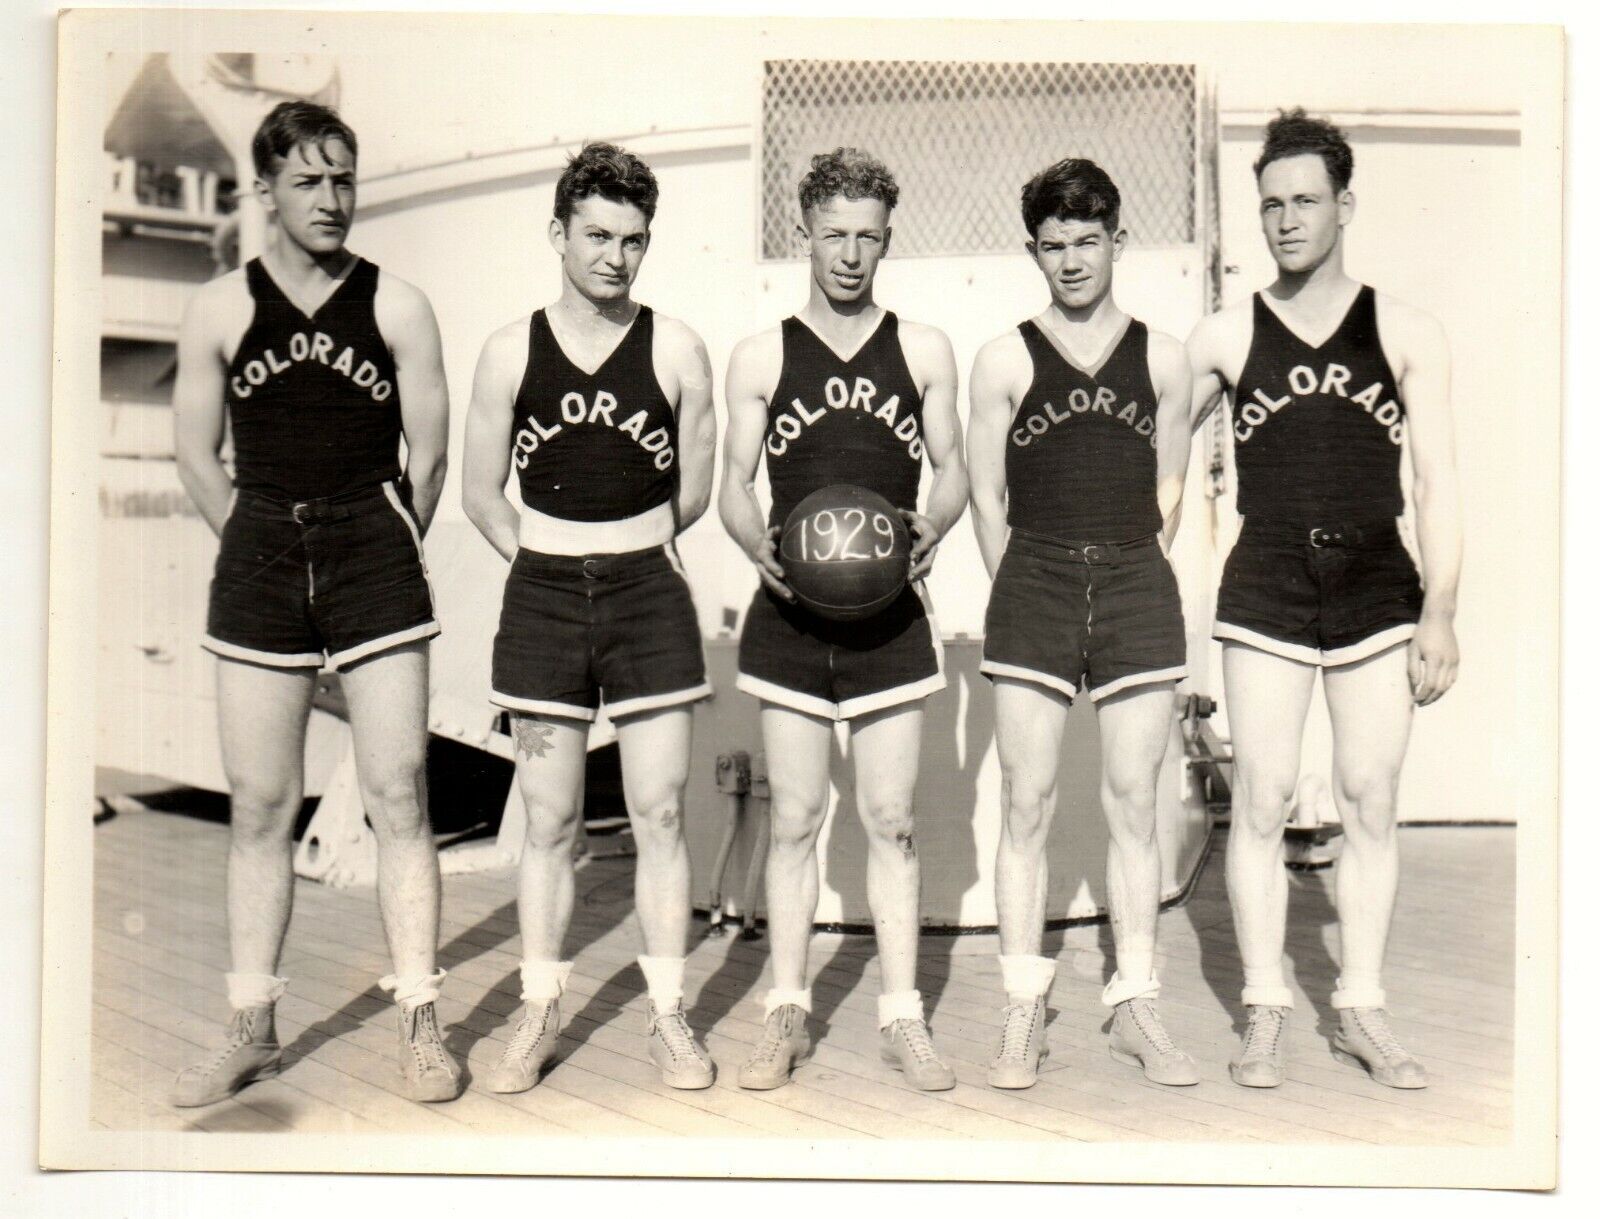 Photo USS COLORADO NAVY BASKETBALL TEAM 1929 sports male physique gay interest